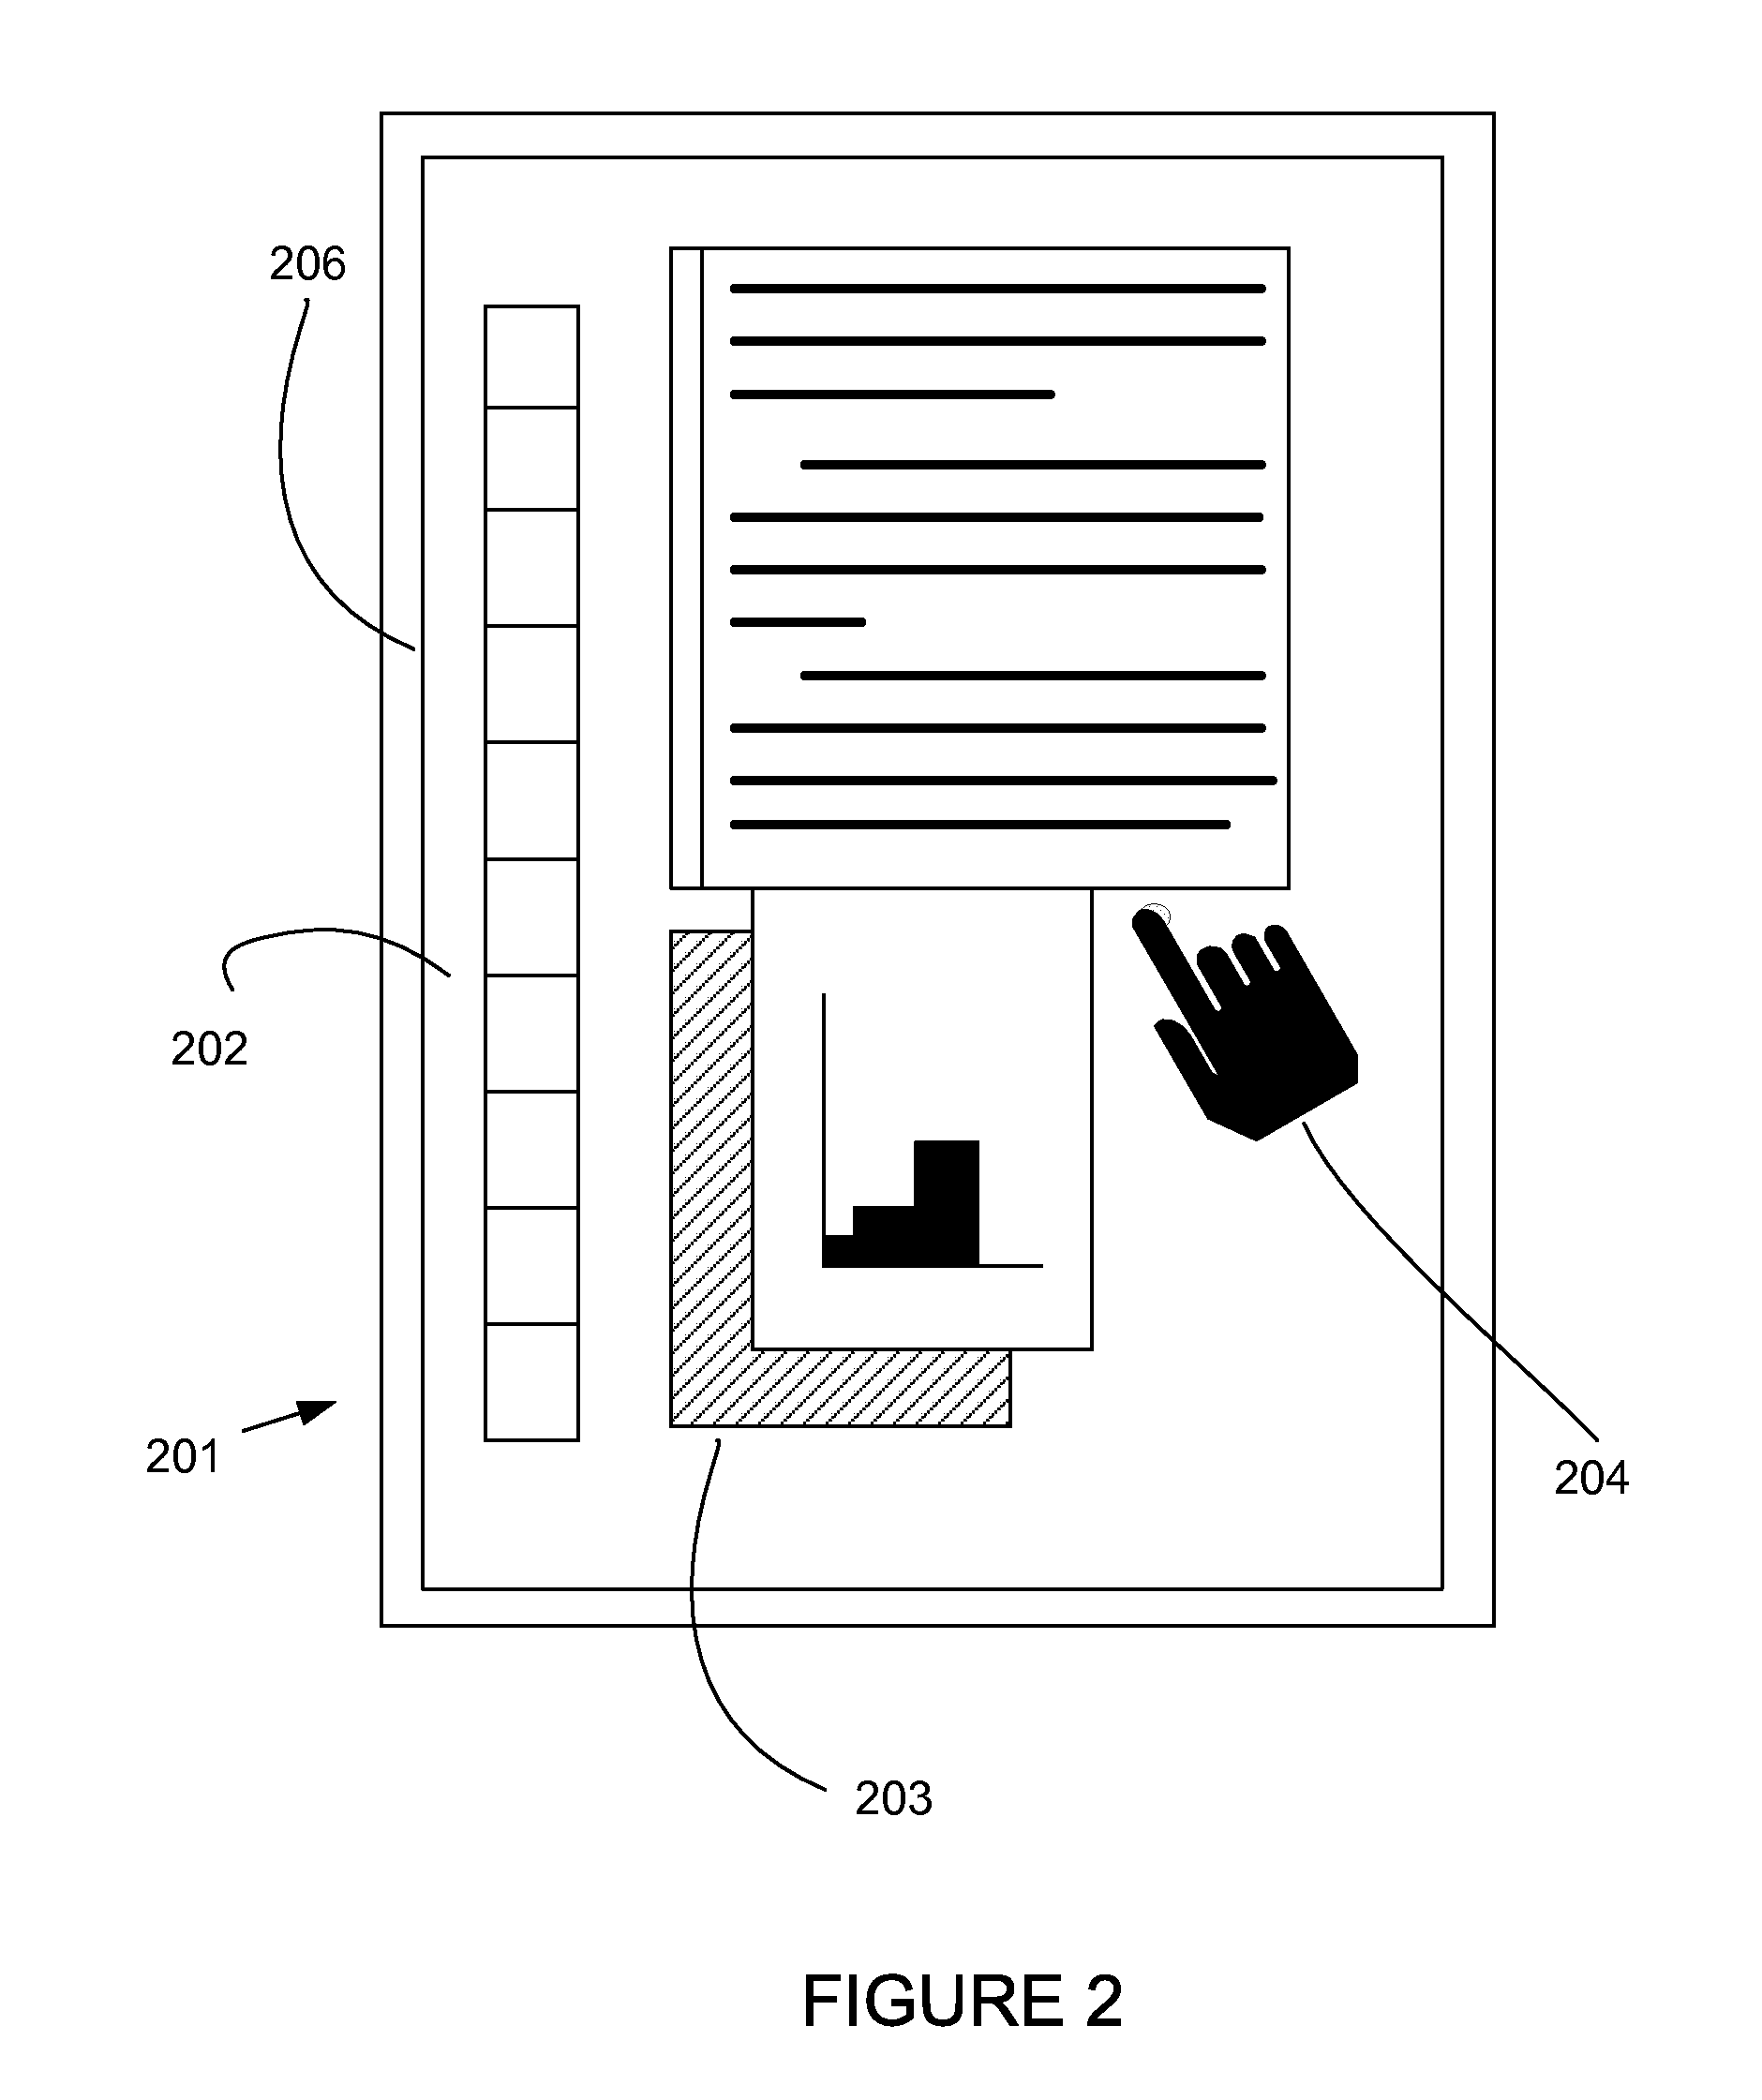 Input Simulation System For Touch Based Devices